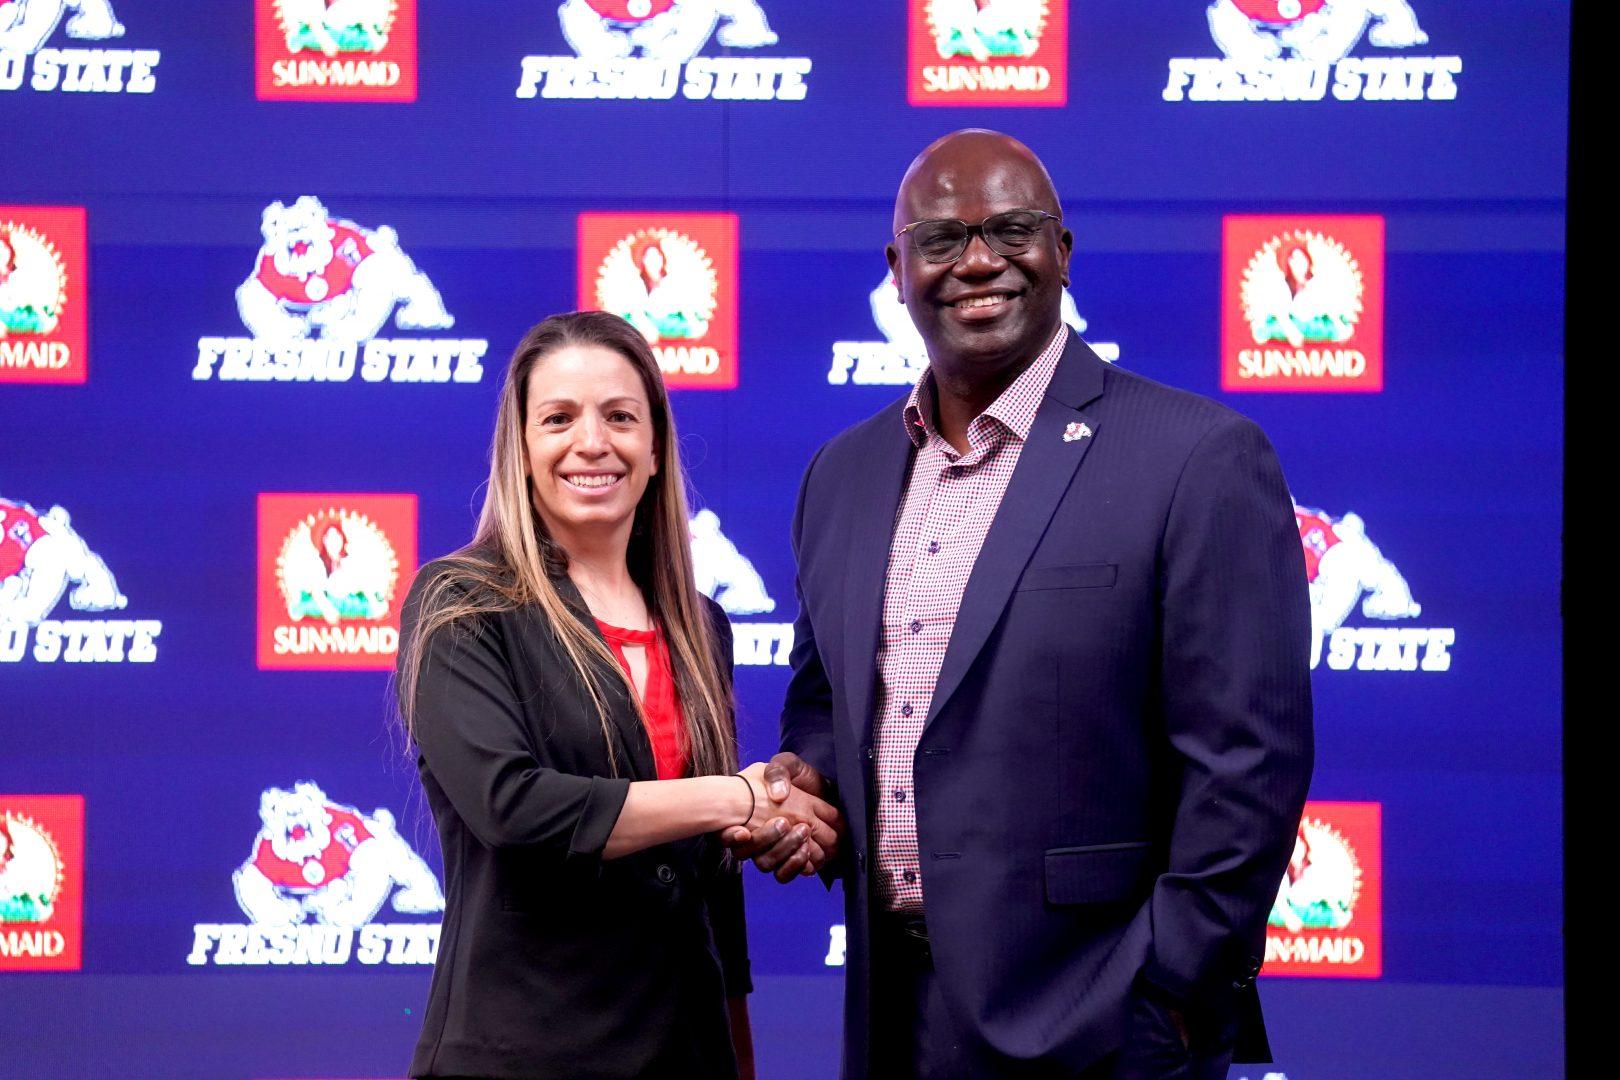 Stacy May-Johnson (left) shakes hands with Fresno State athletic director Terry Tumey (right) at a news conference on July 6. (Courtesy of Fresno State Athletics)